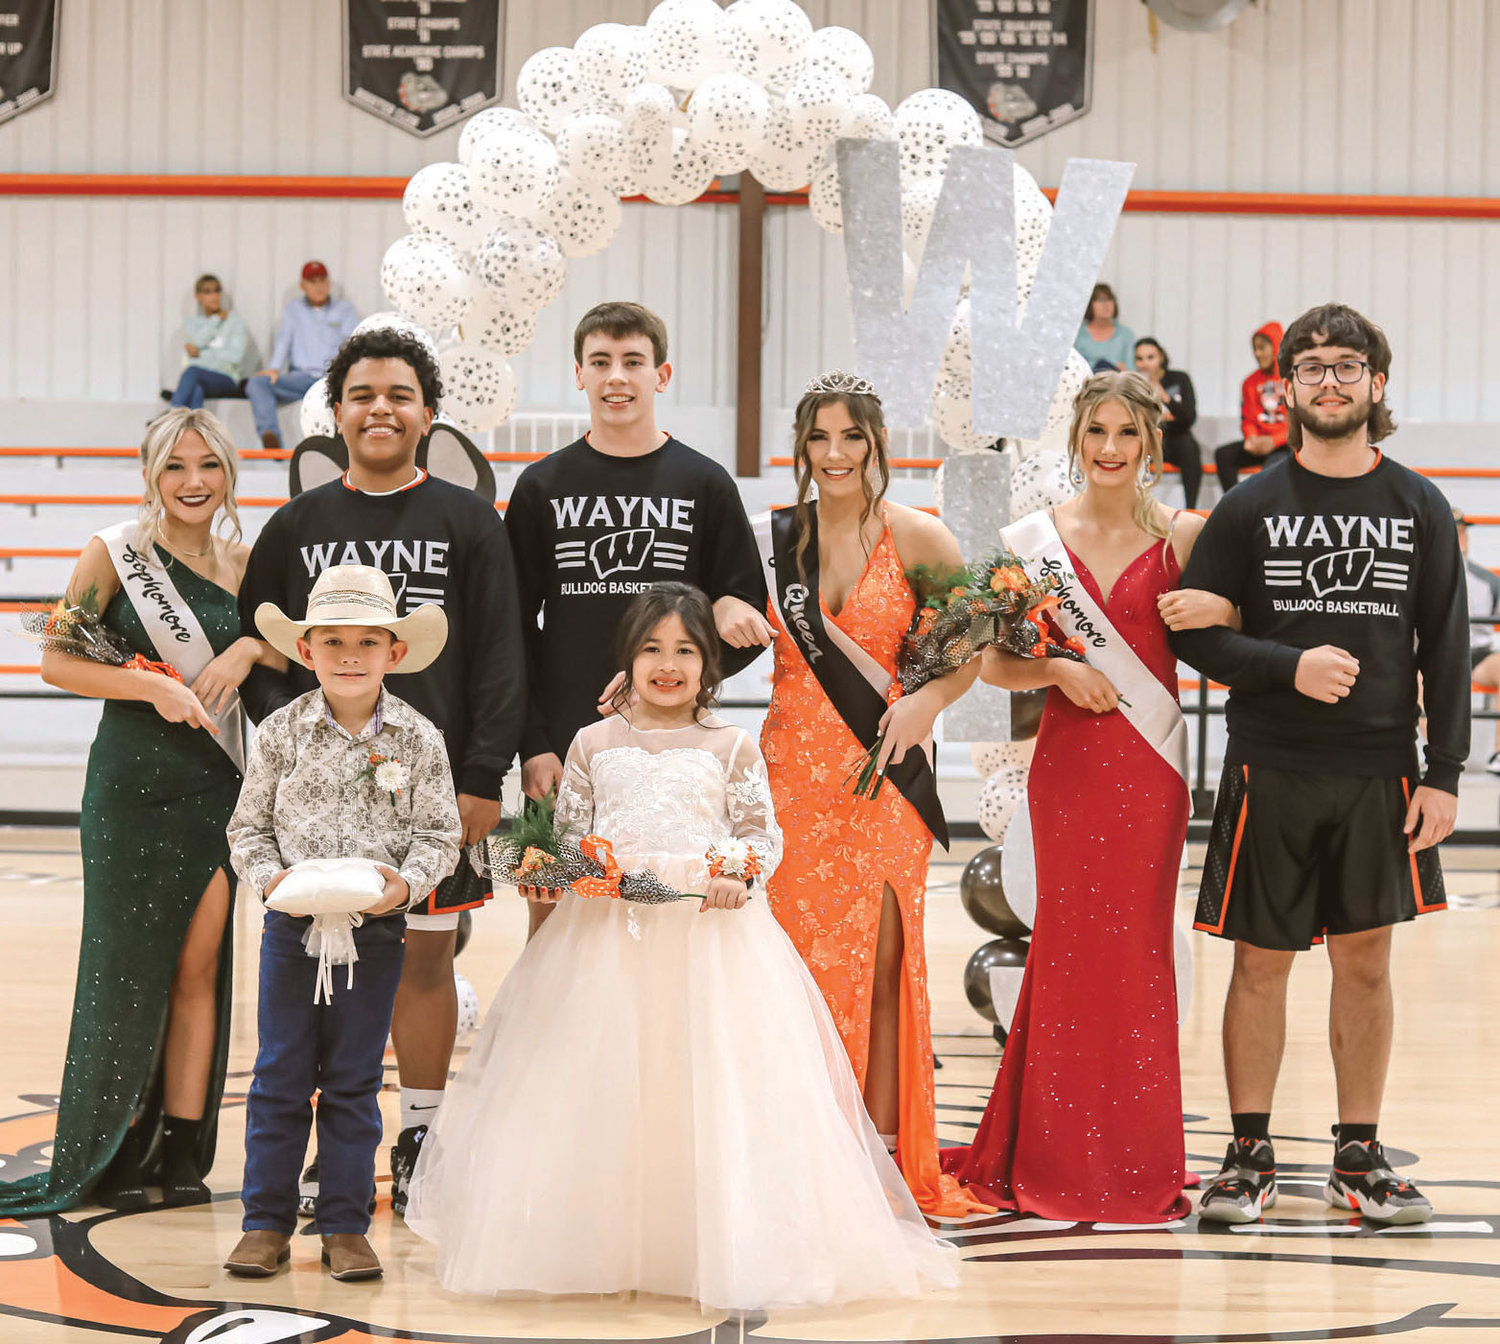 Queen Kaylee Madden and King Kaleb Madden were crowned Homecoming King and Queen last week at Wayne. They are pictured with, from left, Madi Sharp, Taylen Bryant, Kaleb, Kaylee, Addison Keeler and Colton Sweetman. In front are Laramie Sherwood, crown bearer and Andrea Rojas, flower girl.